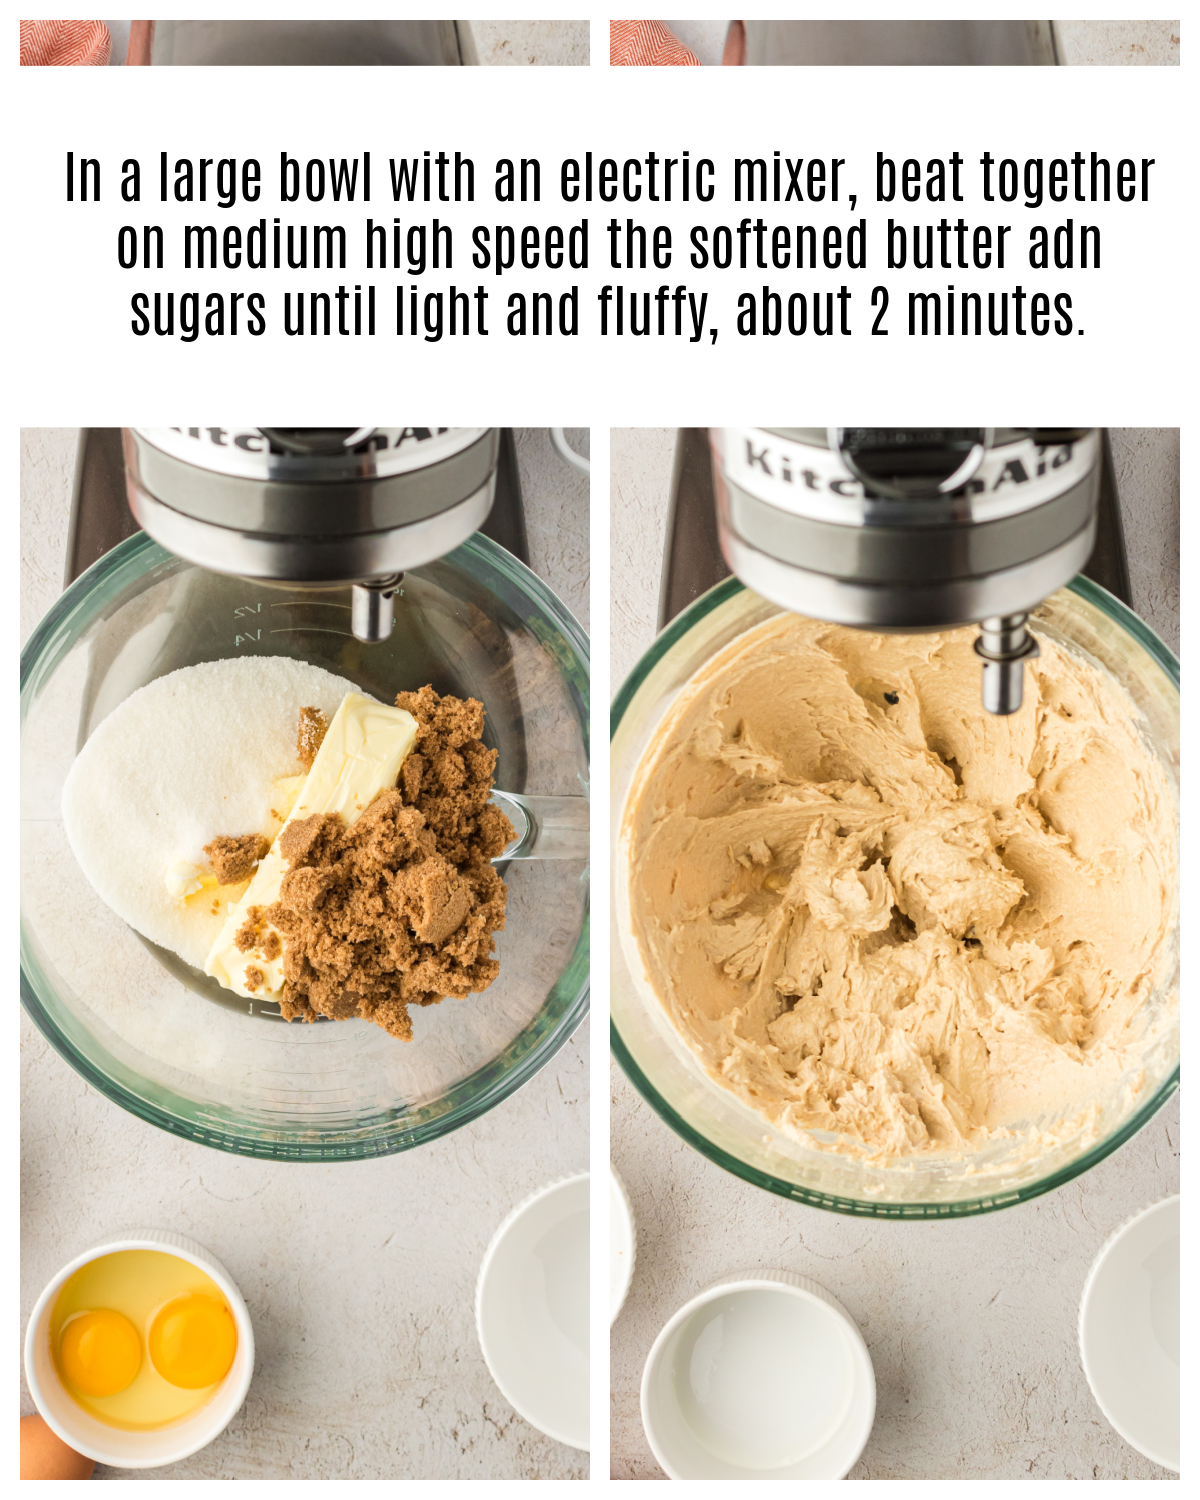 butter, sugar, and brown sugar creamed together in stand mixer bowl